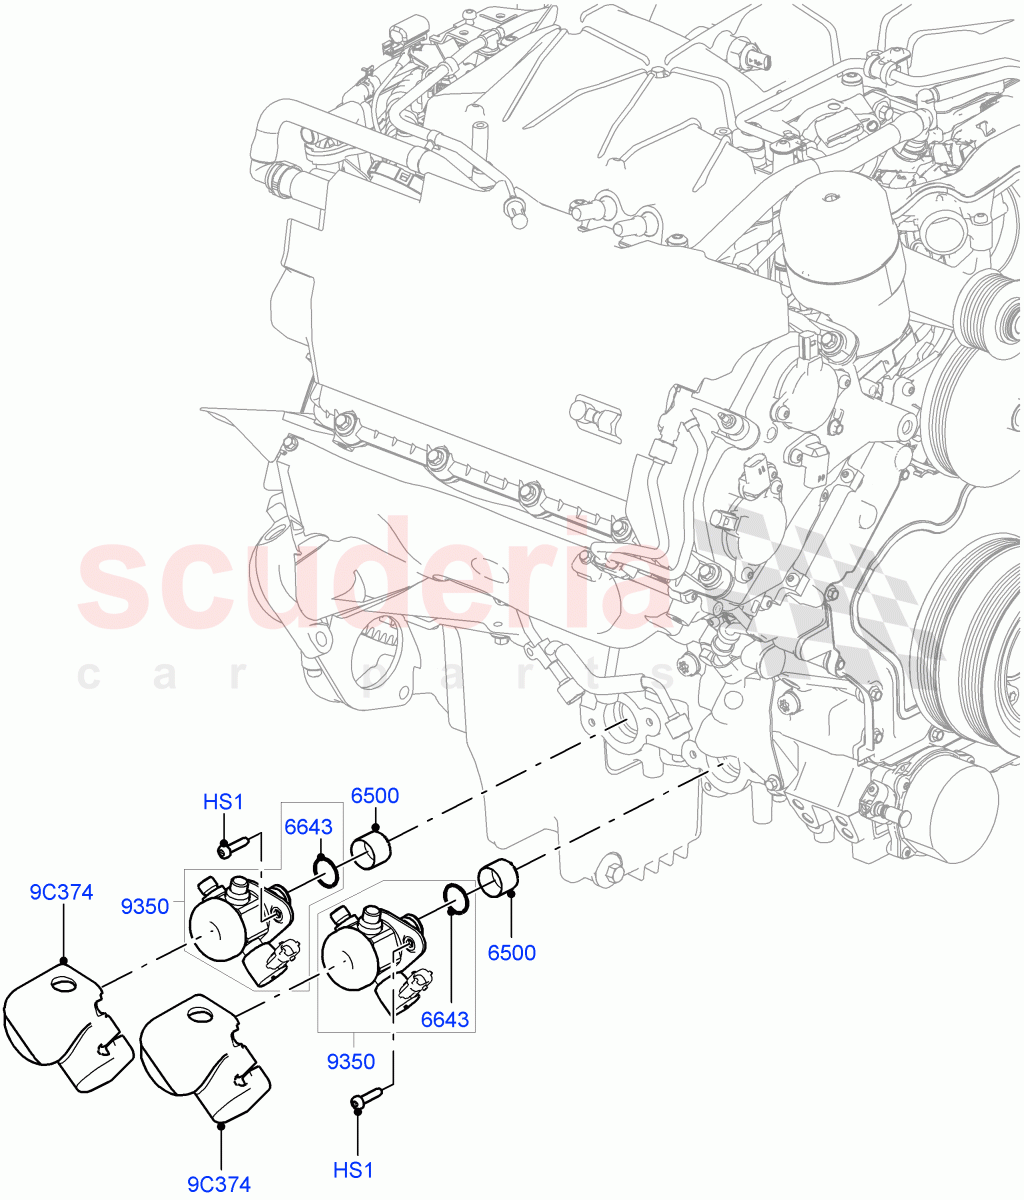 Fuel Injection Pump-Engine Mounted(Solihull Plant Build)(3.0L DOHC GDI SC V6 PETROL)((V)FROMEA000001) of Land Rover Land Rover Discovery 5 (2017+) [3.0 DOHC GDI SC V6 Petrol]